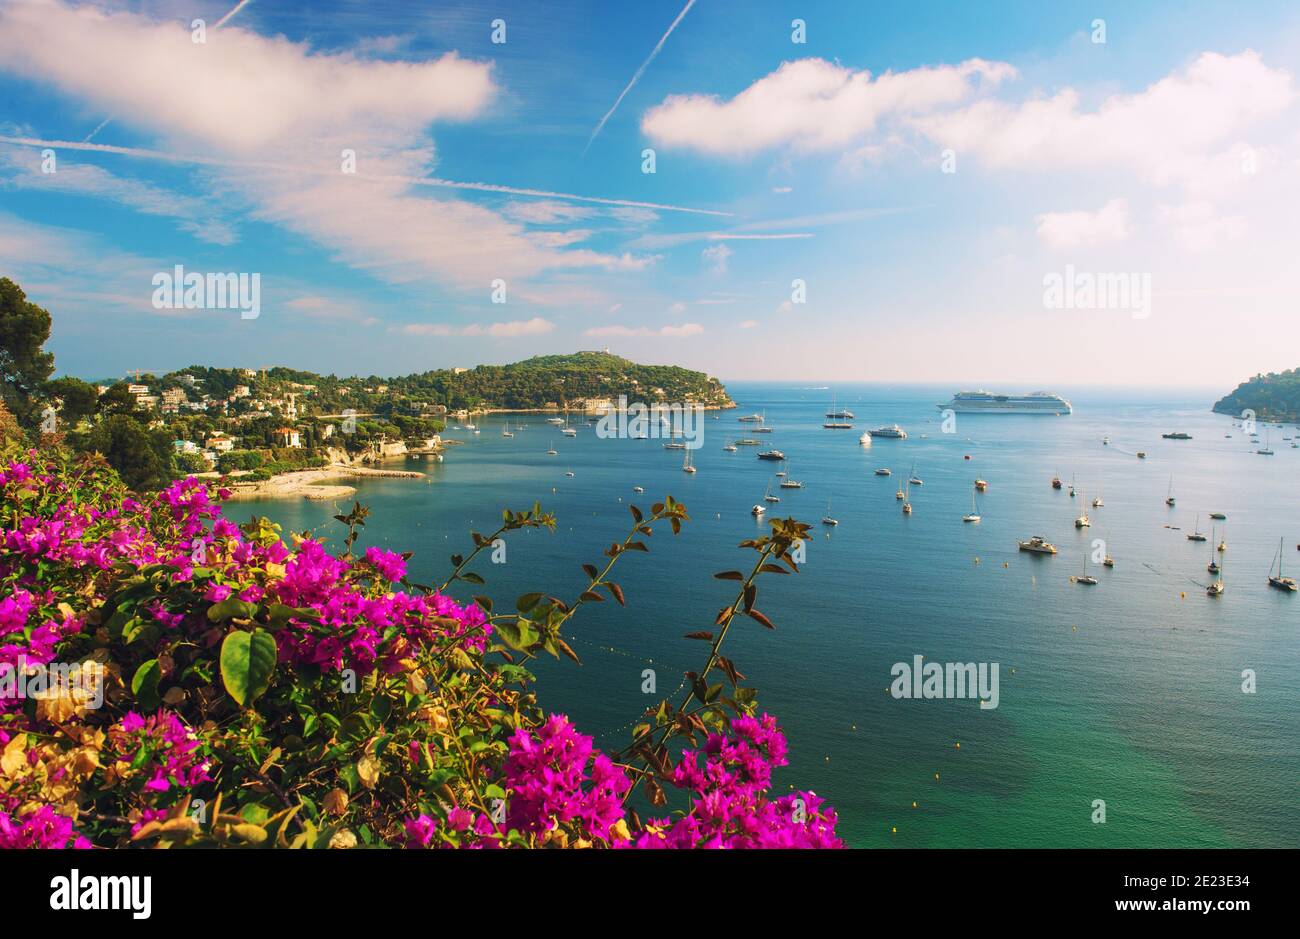 French reviera, view of Villefranche-sur-Mer near Nice and Monaco. Seafront landscape with azalea flowers Stock Photo